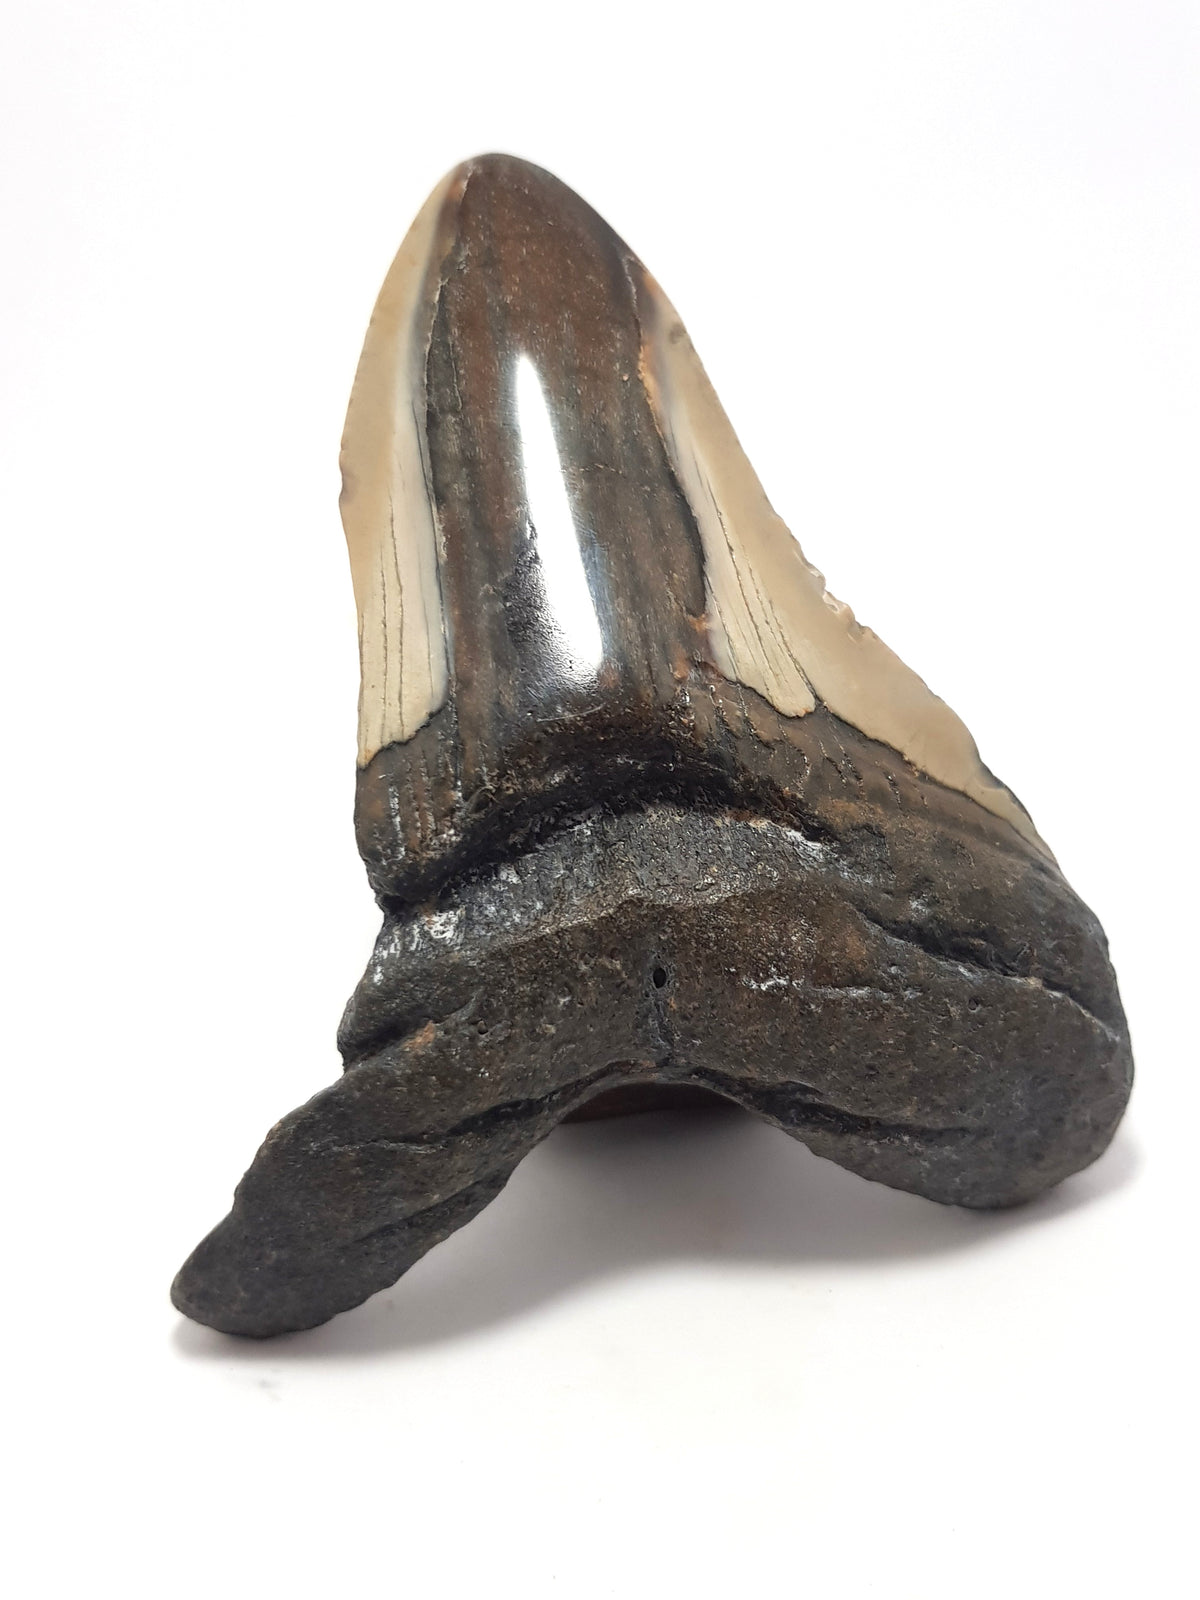 partial megalodon tooth. some mushroom coloured enamel present on the surface but missing in the centre of the tooth. Root and main tooth material is black. This sample is missing the left distal crown and a large section of root.